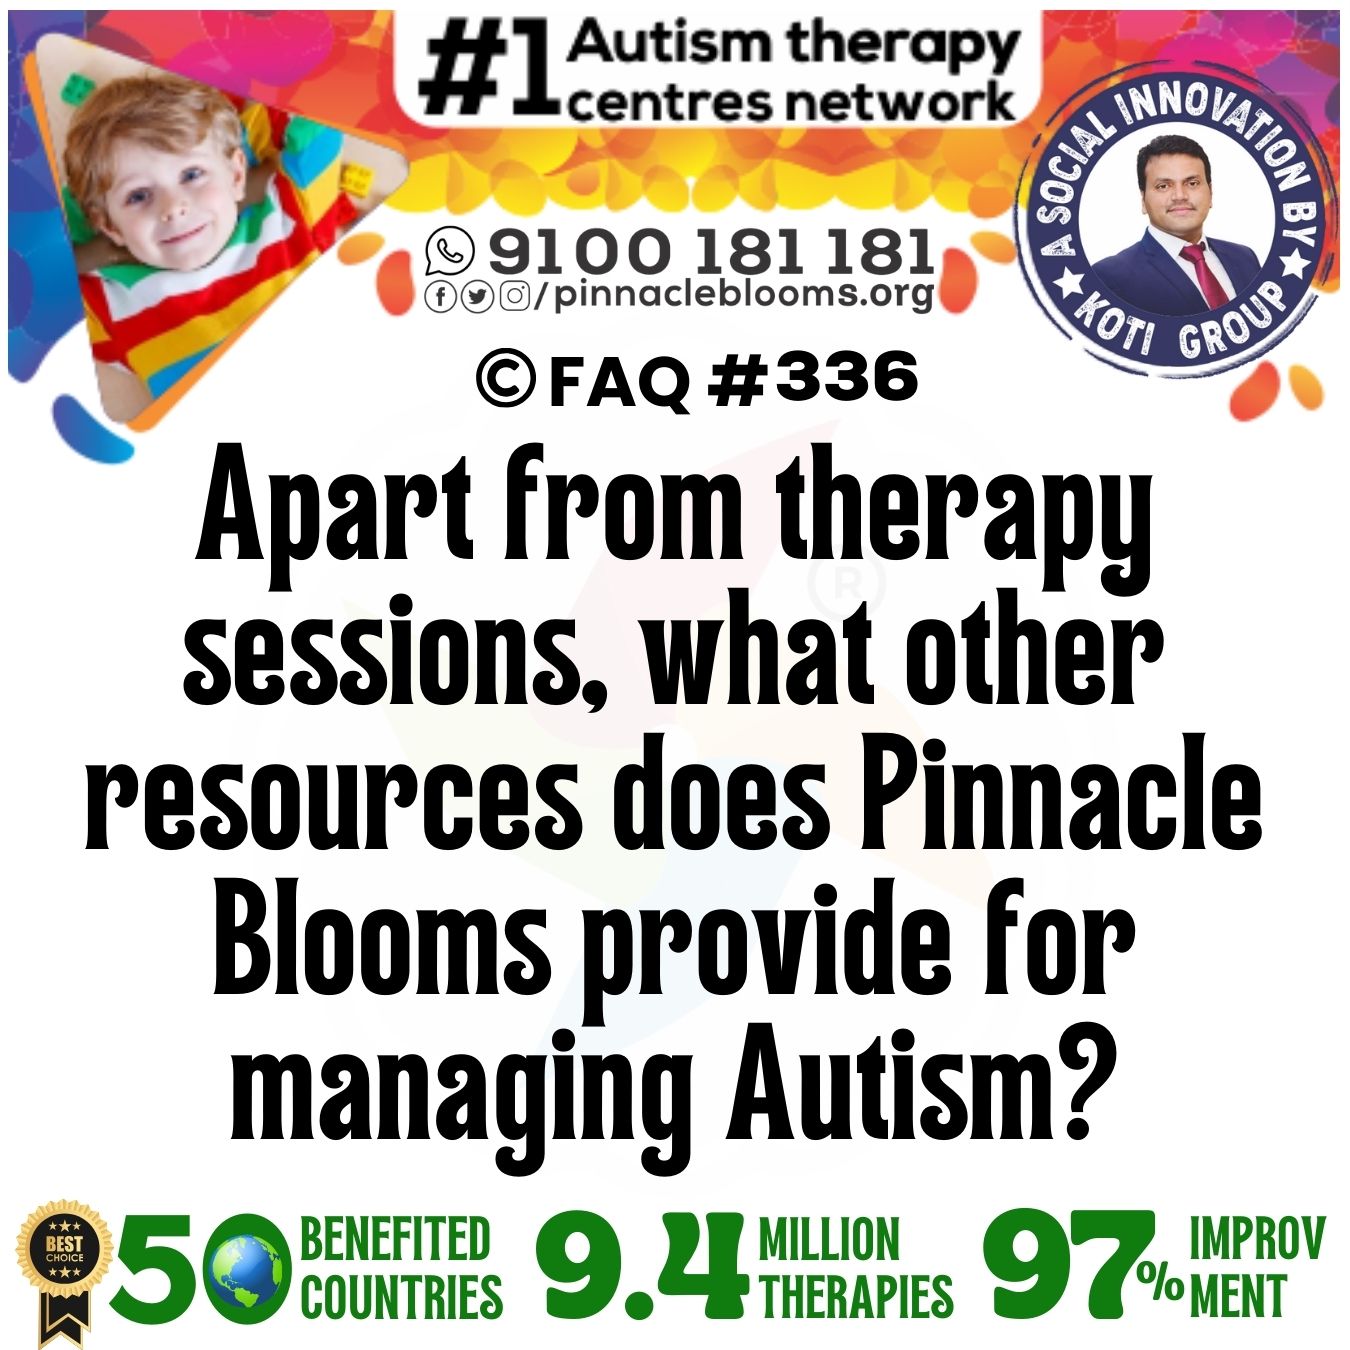 Apart from therapy sessions, what other resources does Pinnacle Blooms provide for managing Autism?